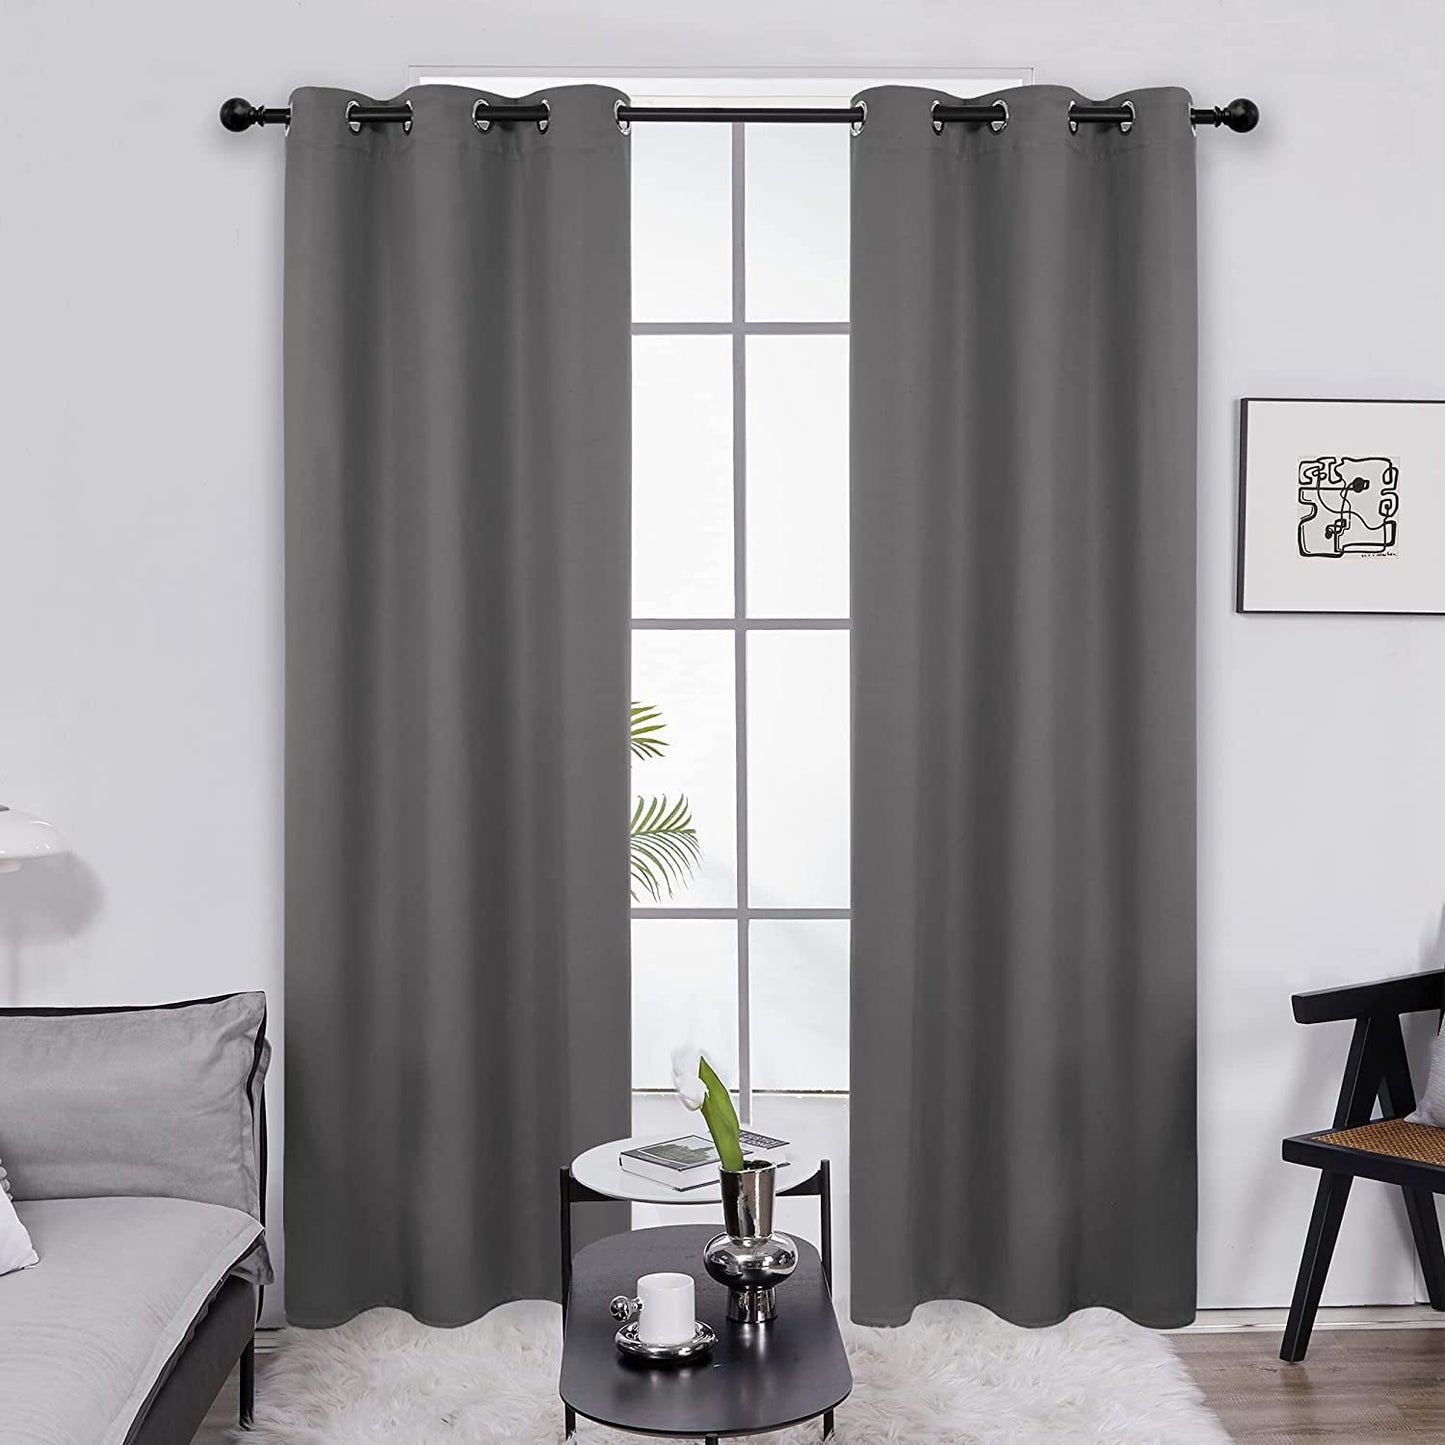 Deconovo 100% Blackout Curtains Room Darkening Thermal Insulated Blackout Grommet Window Curtain for Living Room,Black,42X120-Inch,1 Panel  Deconovo Light Grey 42X120 Inch 